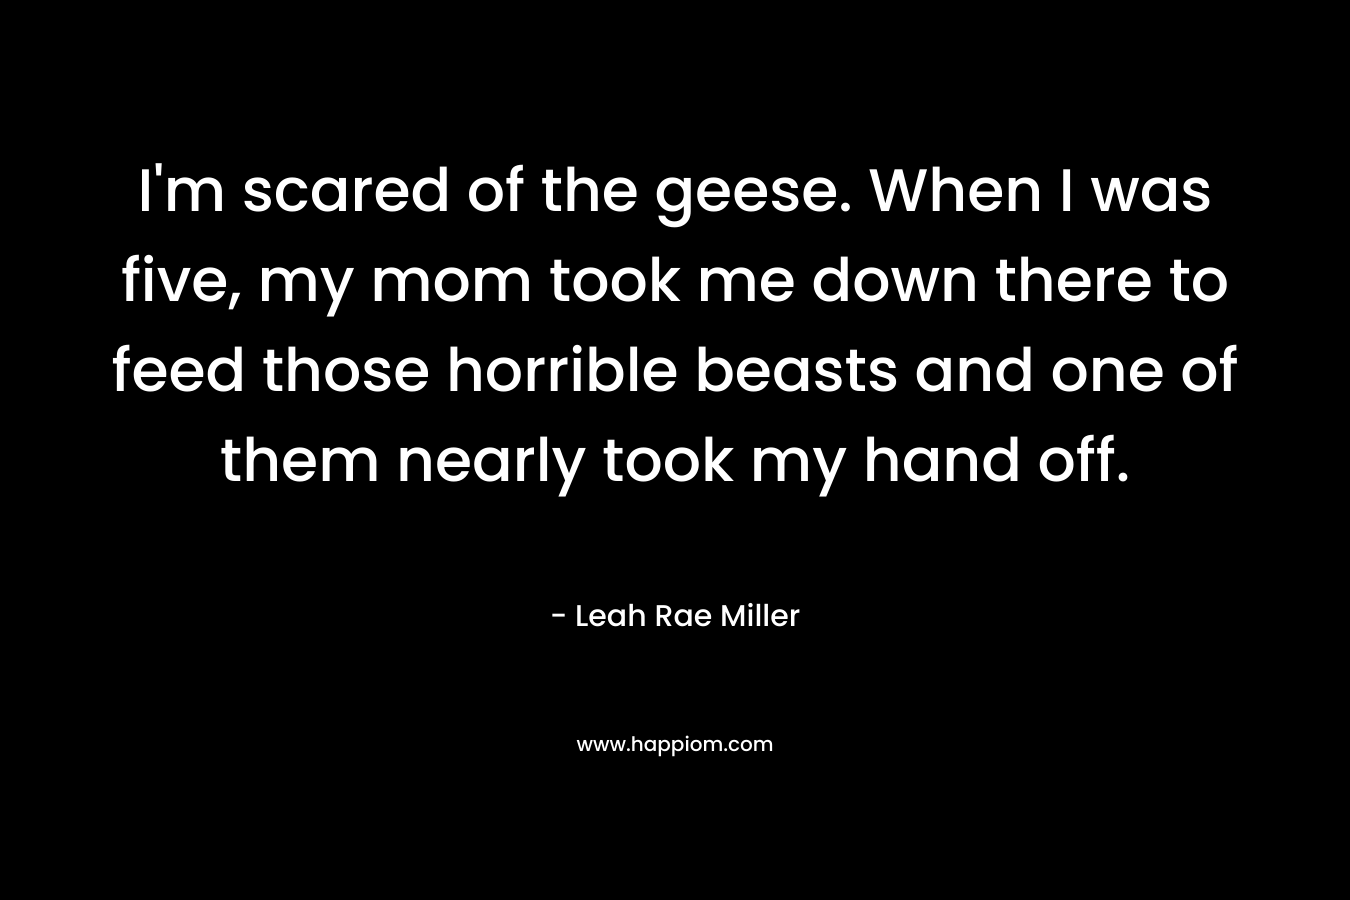 I’m scared of the geese. When I was five, my mom took me down there to feed those horrible beasts and one of them nearly took my hand off. – Leah Rae Miller